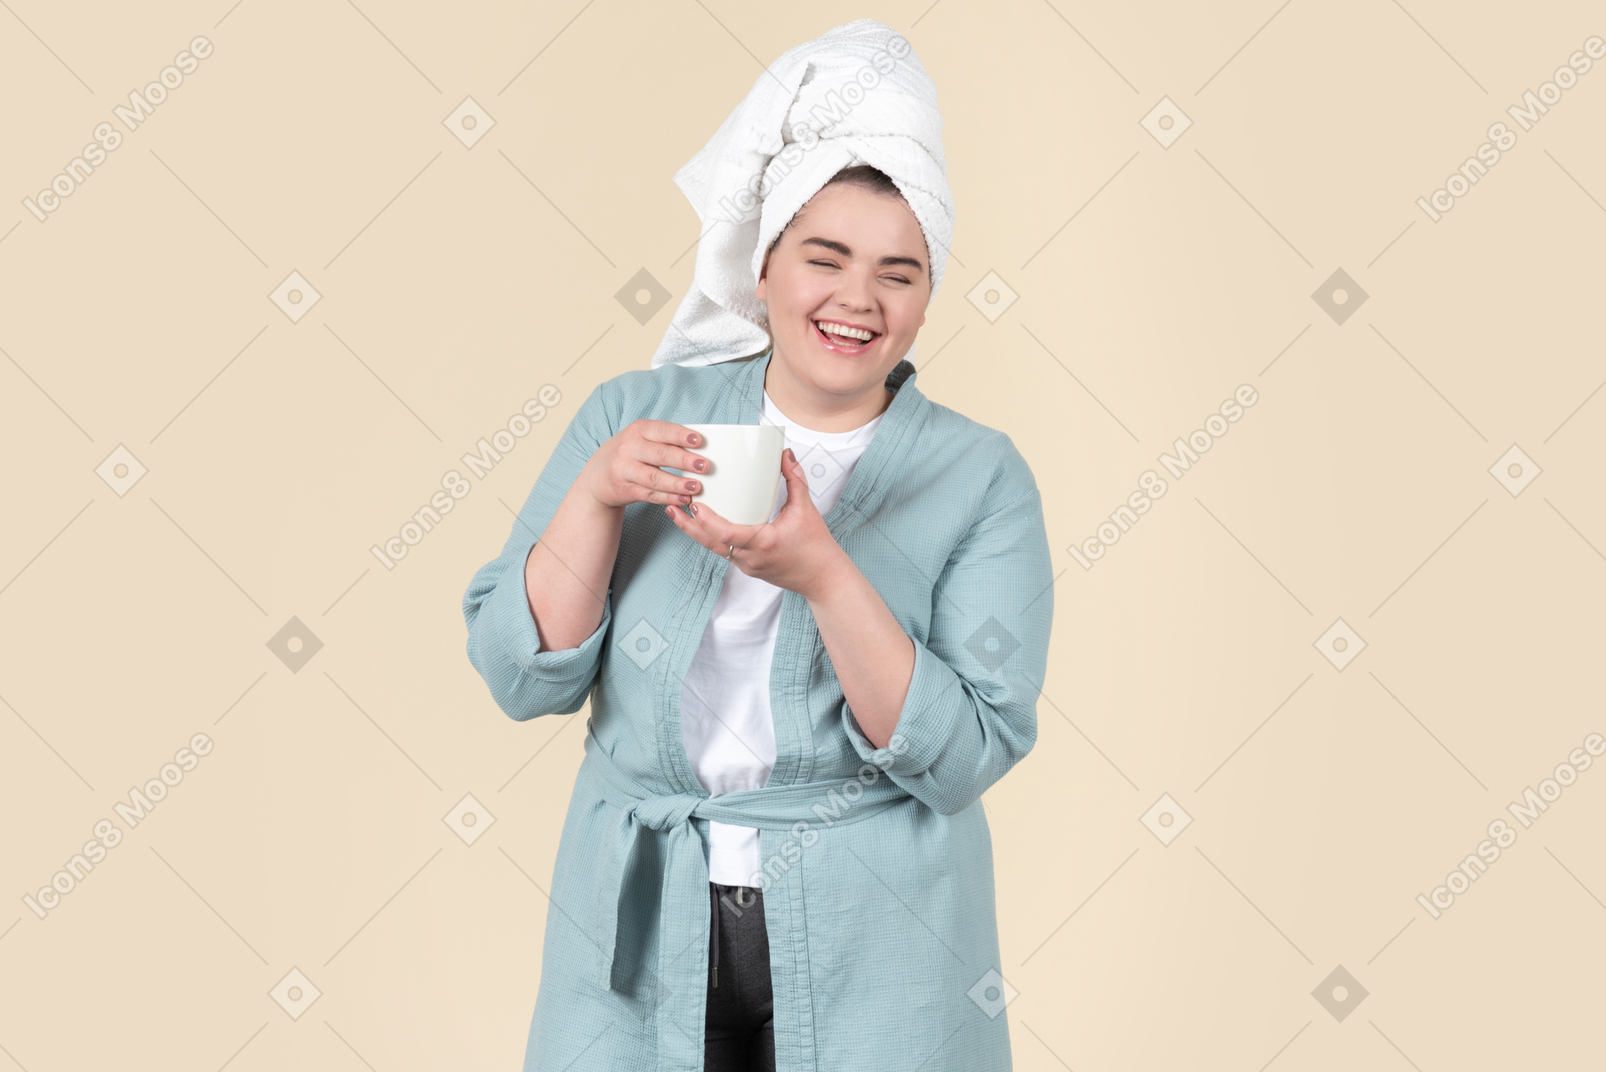 Smiling young woman in robe